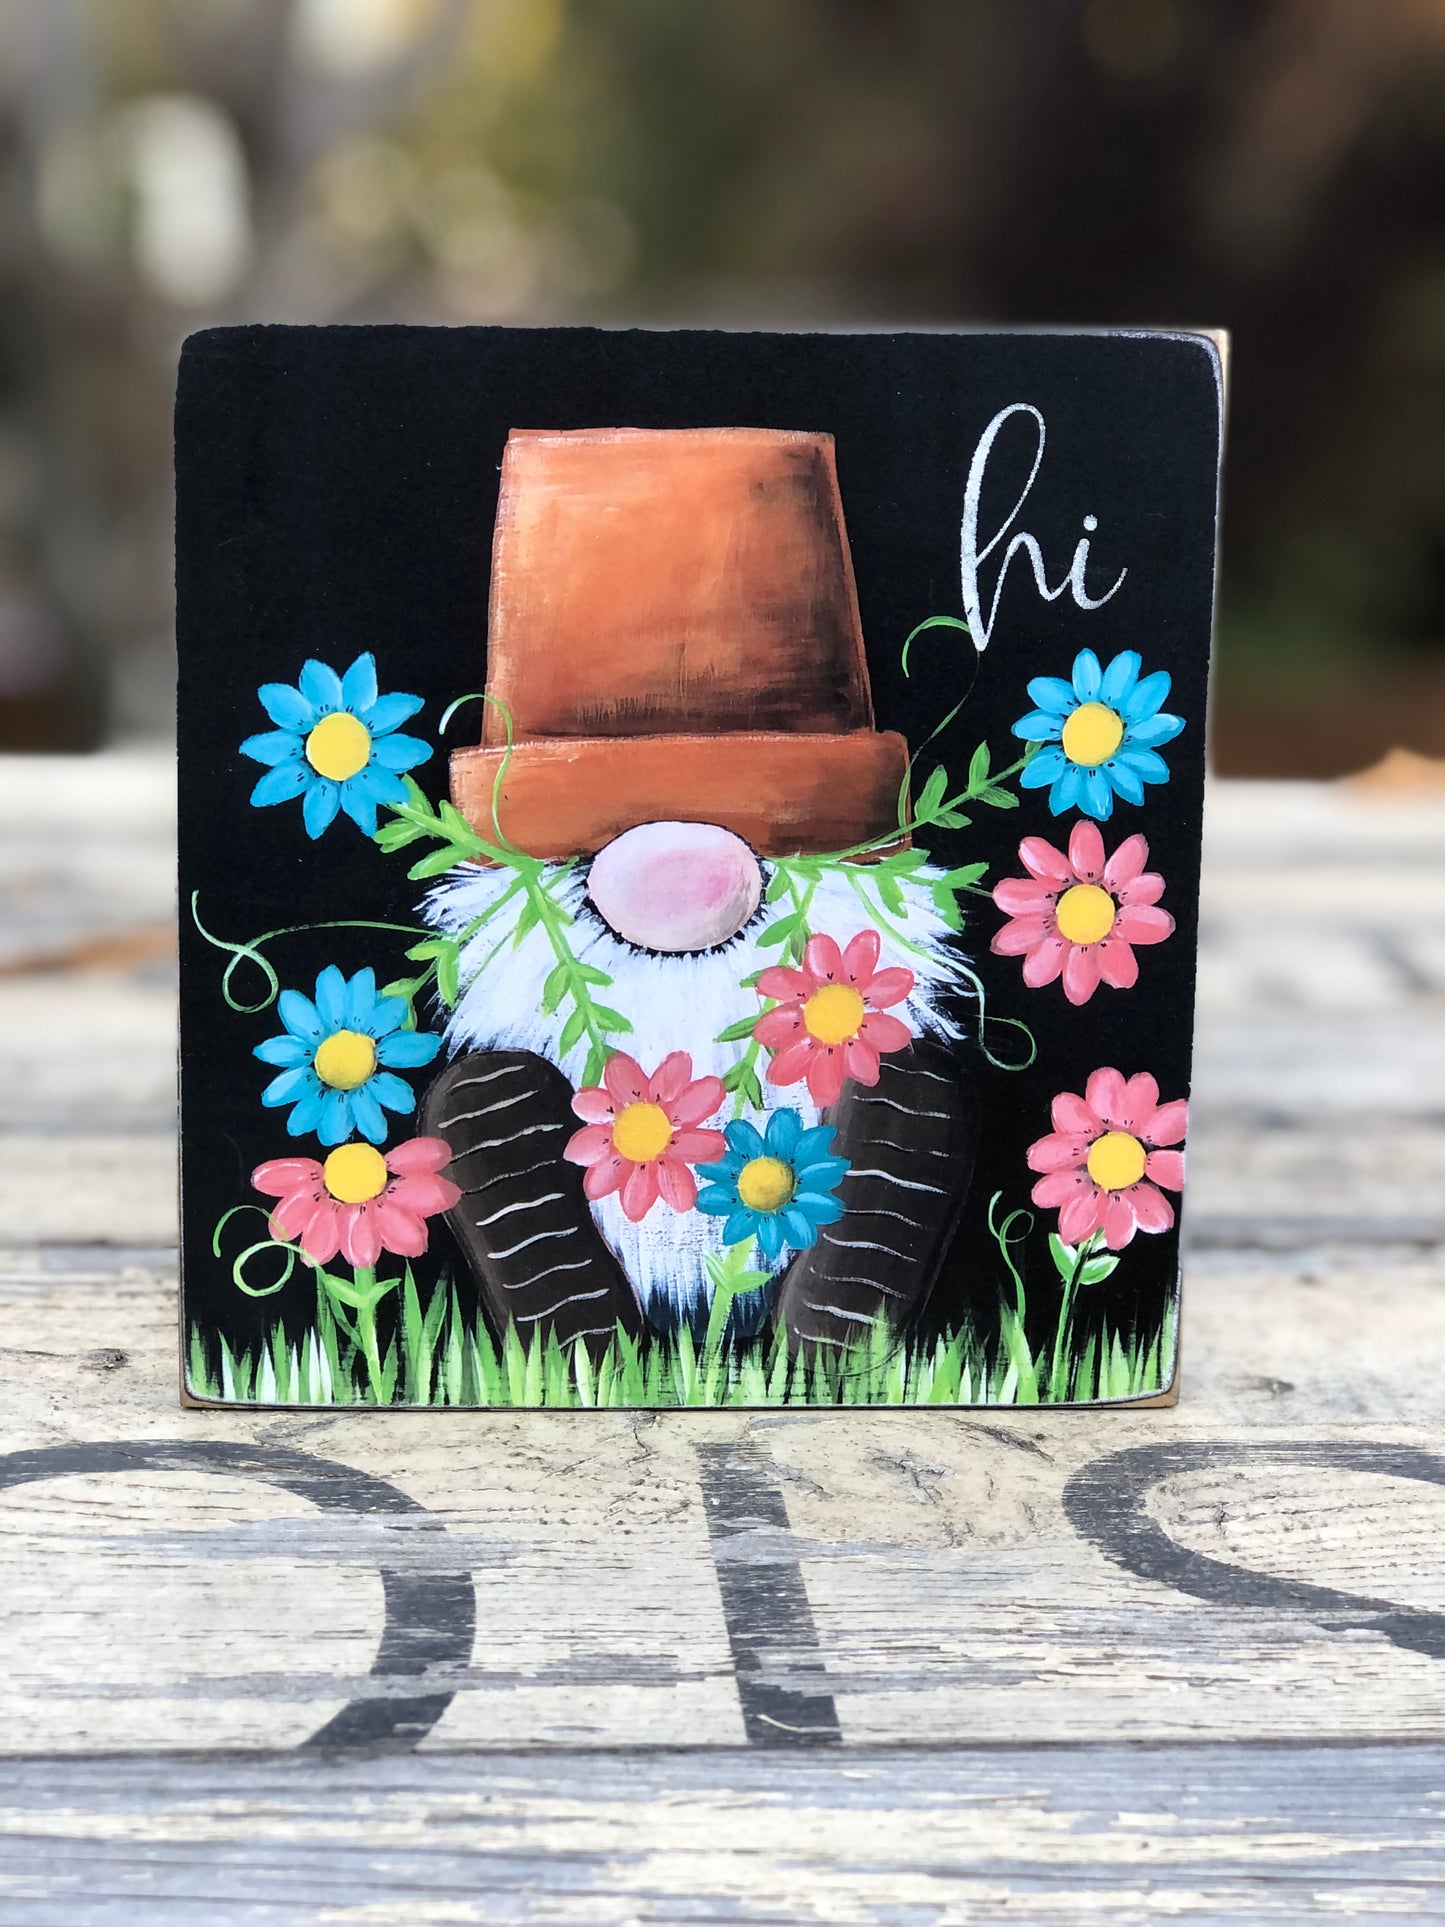 GNOME PRINT- DOUBLE SIDED CUTE GNOME WITH FLORAL POT AS A HAT SAYING HI WOOD SIGN WITH AN INSPIRATIONAL SAYING